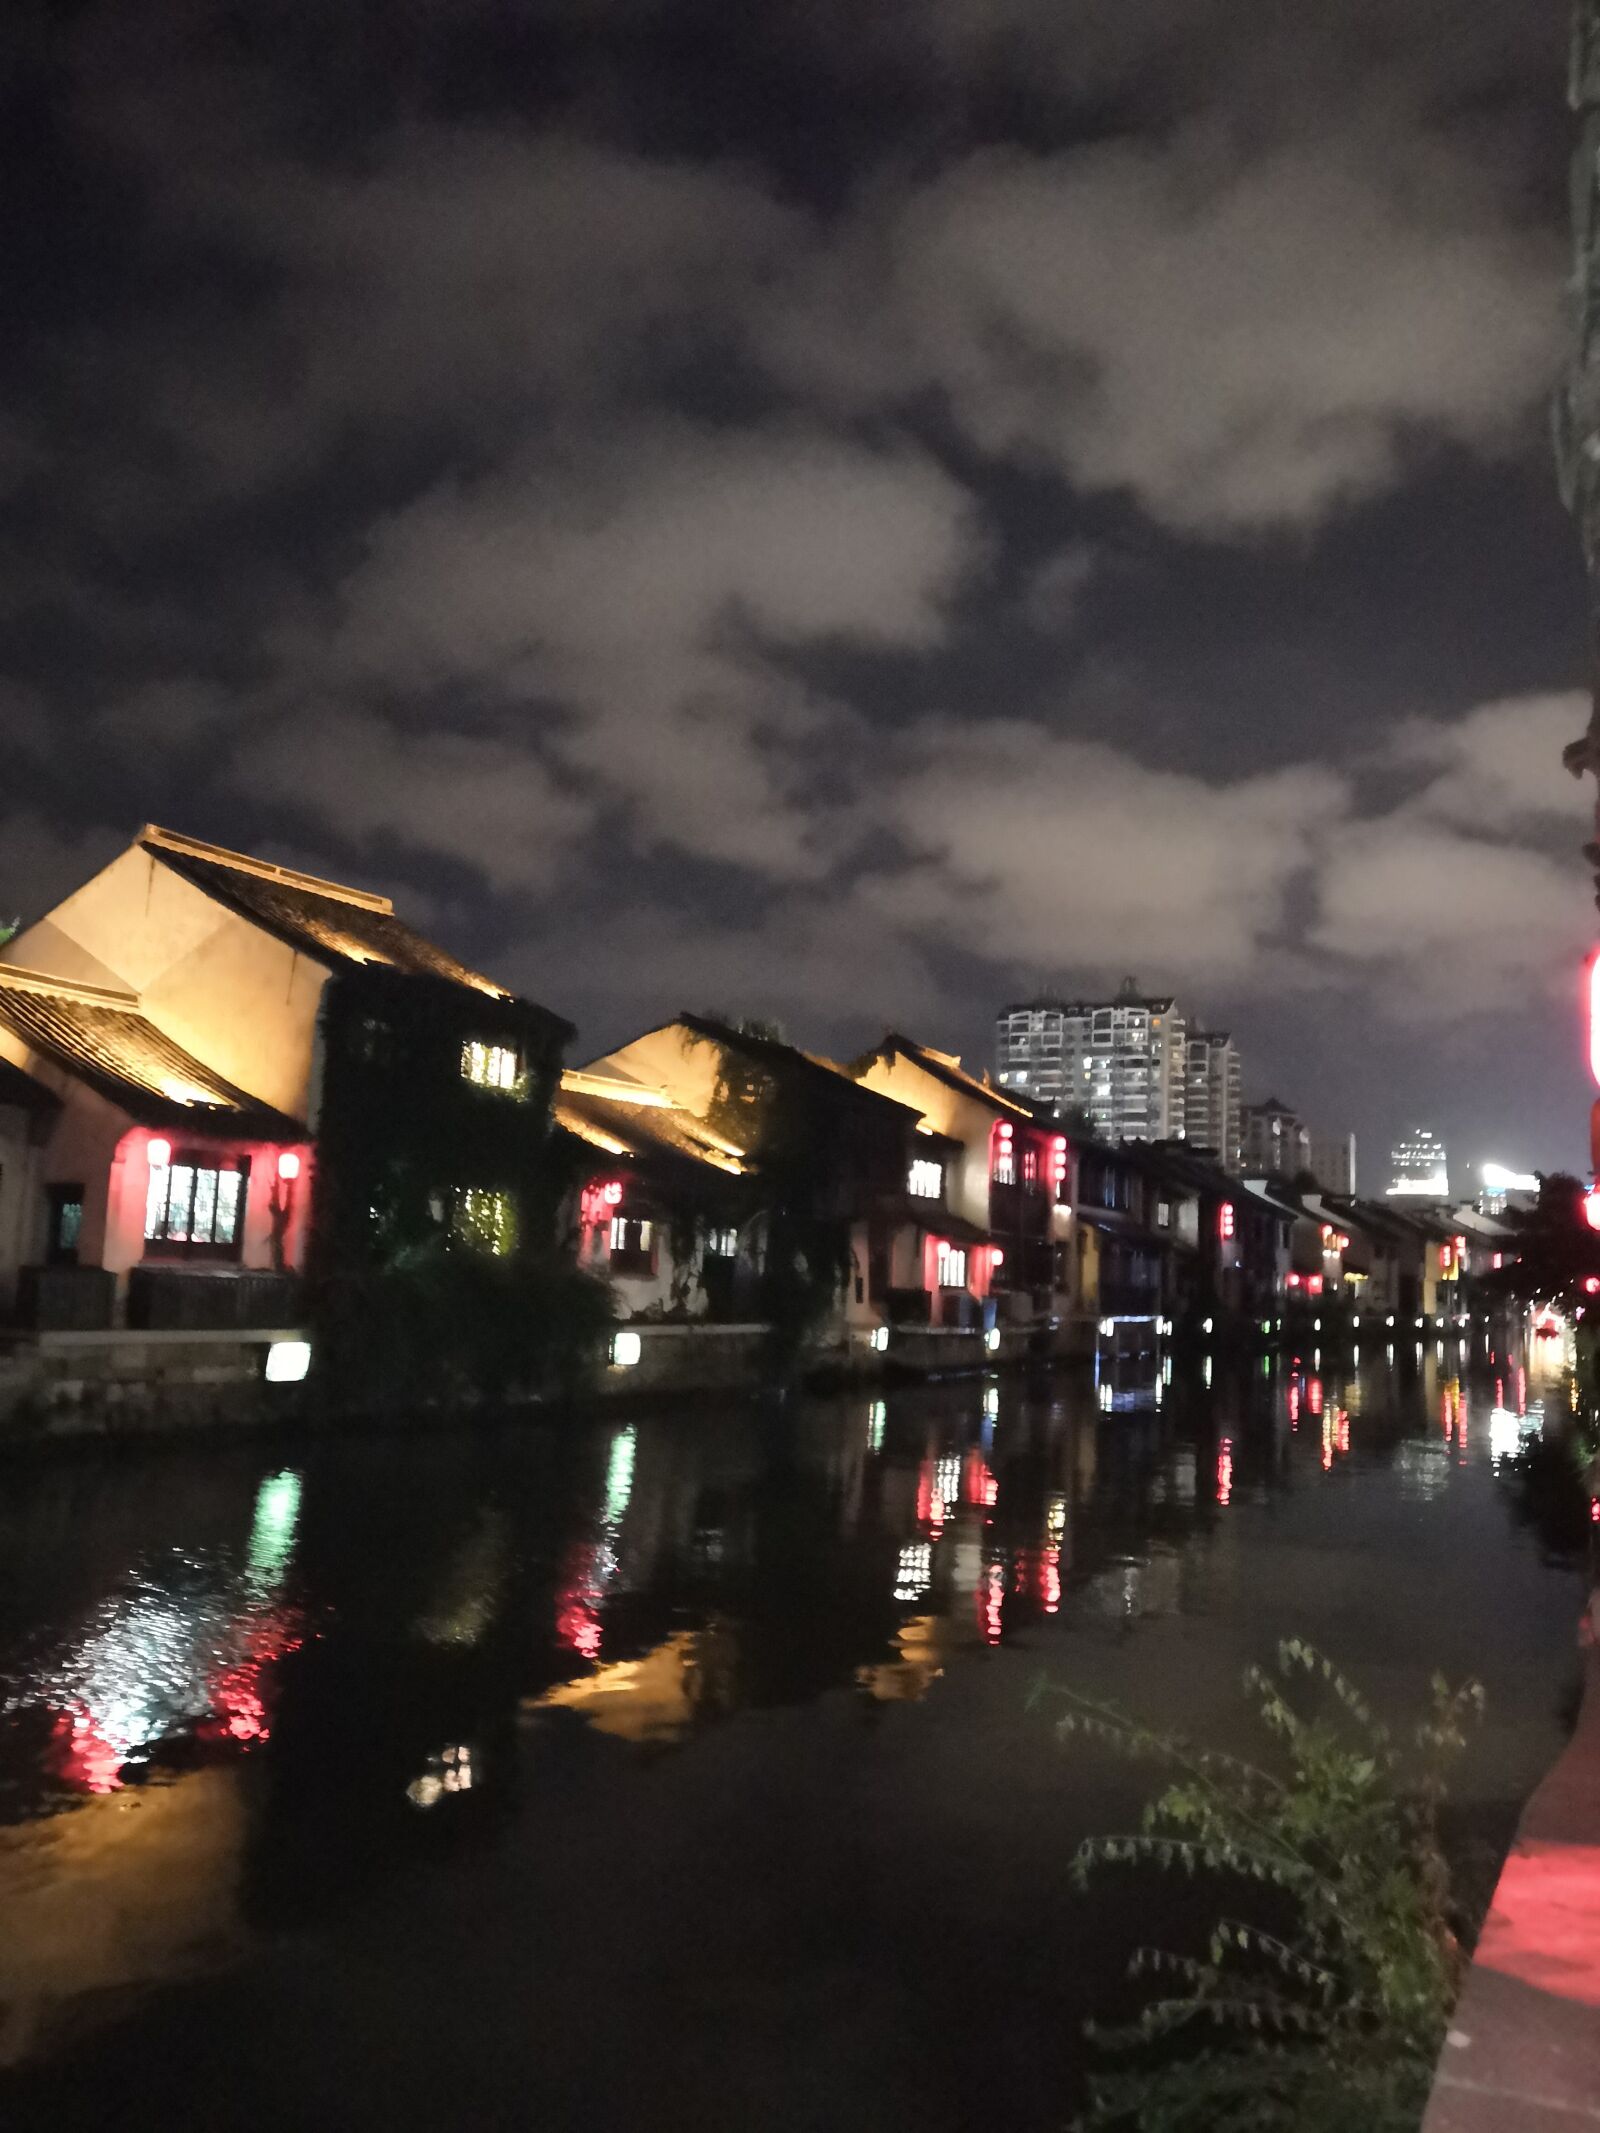 HUAWEI Honor 10 sample photo. The ancient town, canal photography